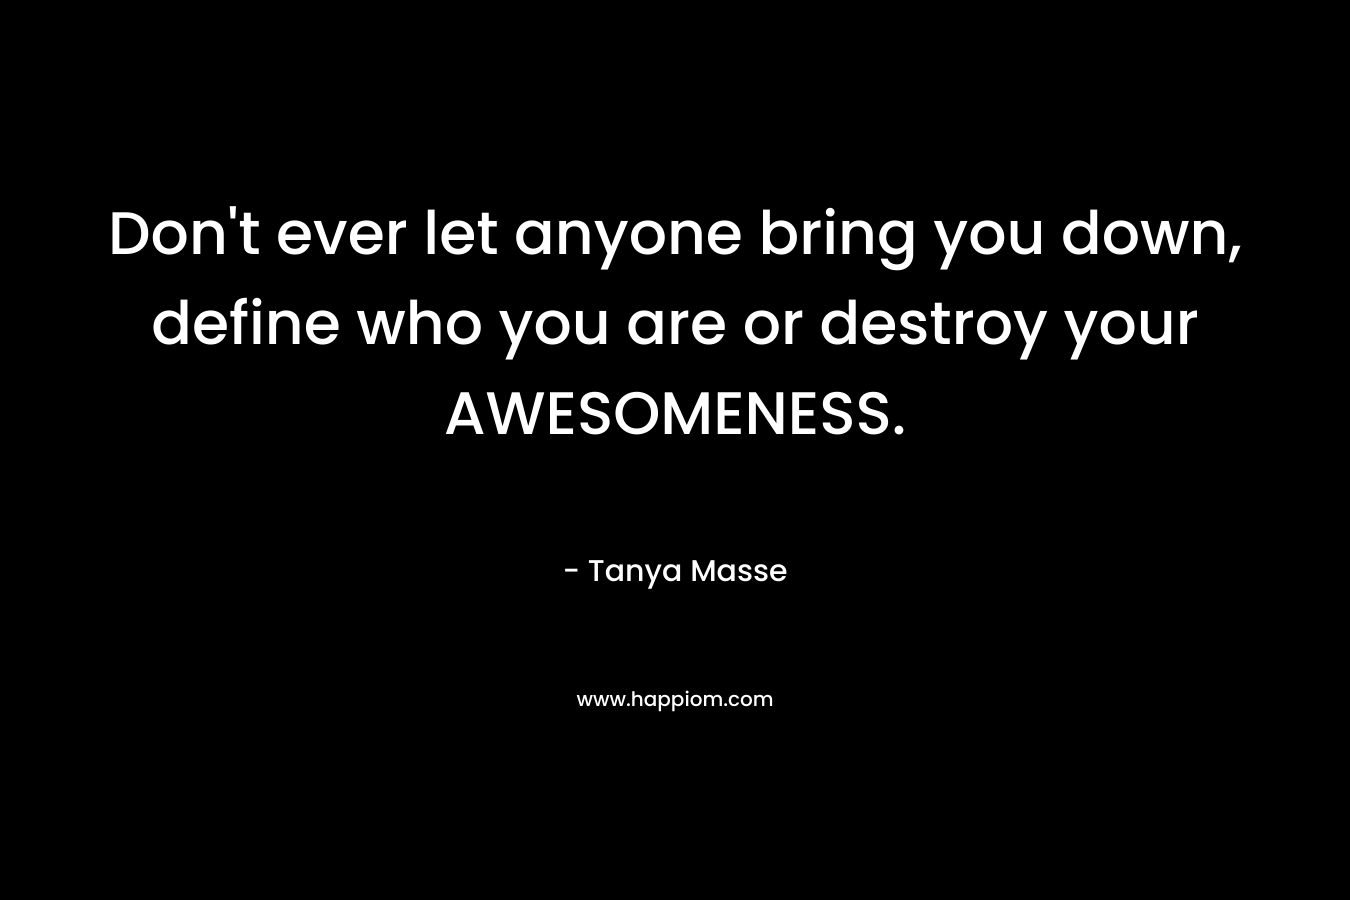 Don’t ever let anyone bring you down, define who you are or destroy your AWESOMENESS. – Tanya Masse